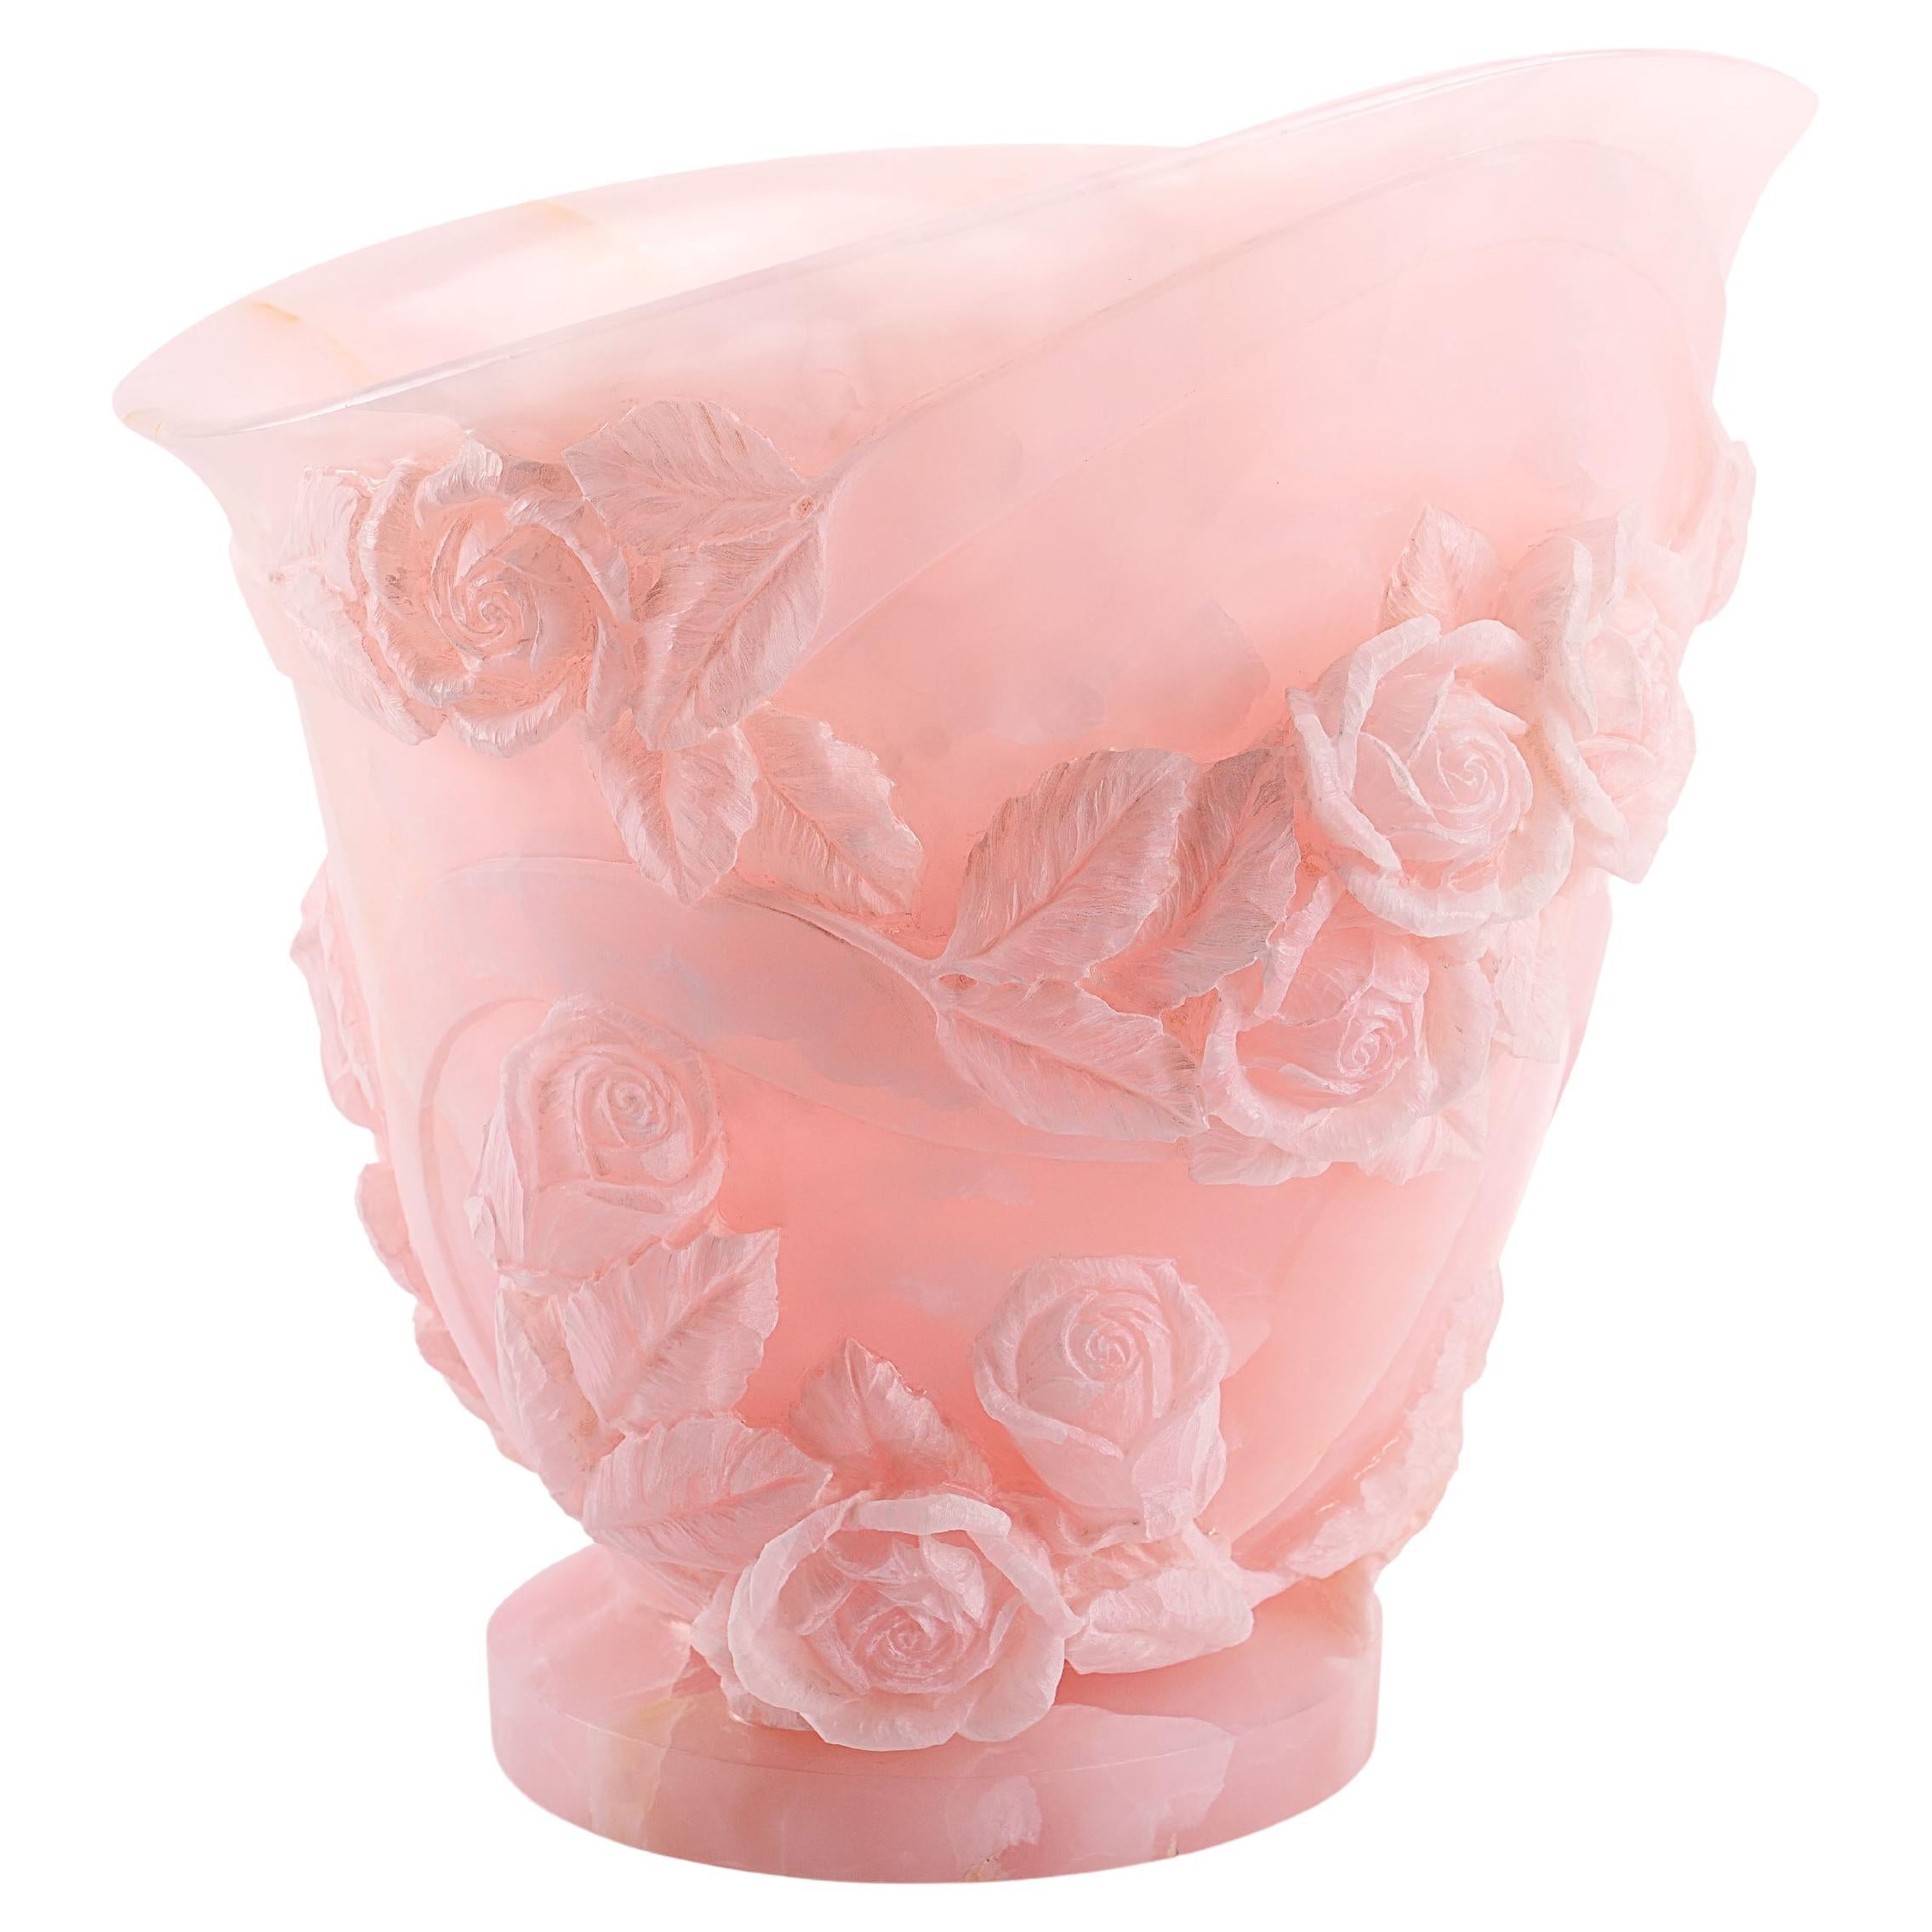 Rose Sculpture Vase 13 Roses Hand Carved Italy Pink Onyx Block Limited Edition For Sale